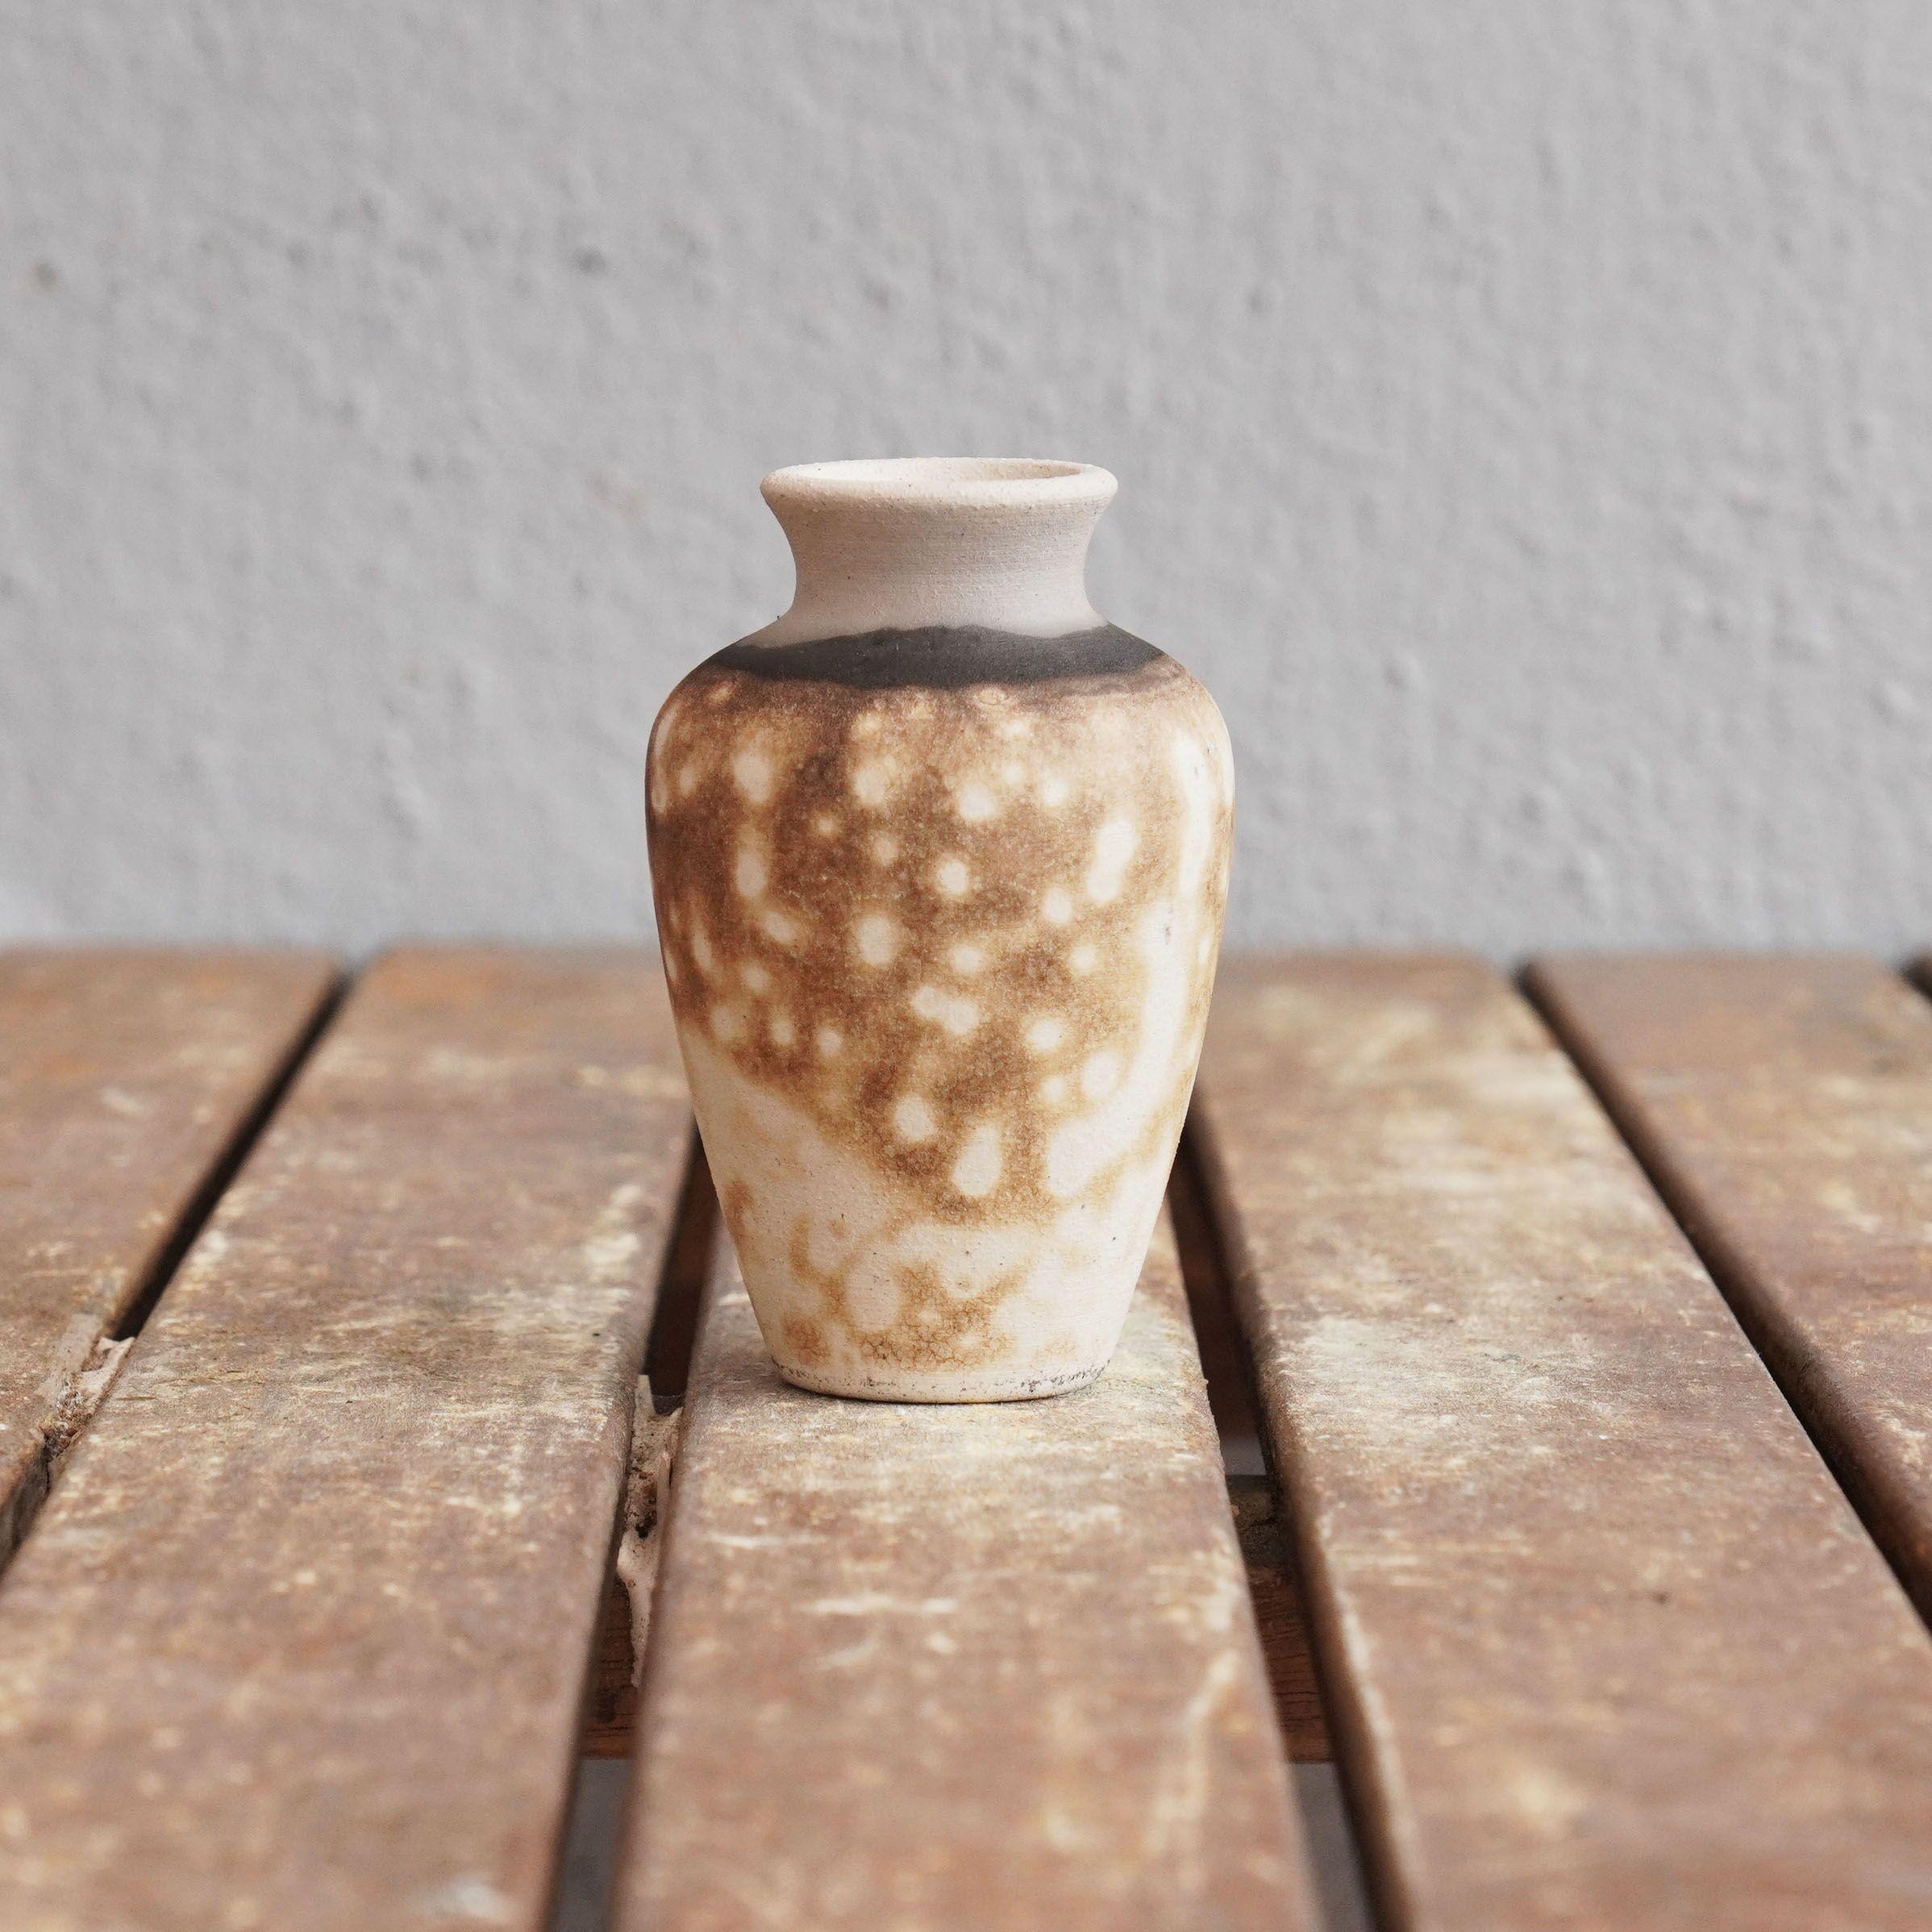 Hana O ~ 花 Flower 

Our Hana O mini raku vase bears a classical pottery vase shape and is suitable for wide headed single stalk flowers. This vase makes for an adorable gift or a tabletop decorative piece that truly stands out. Each piece is